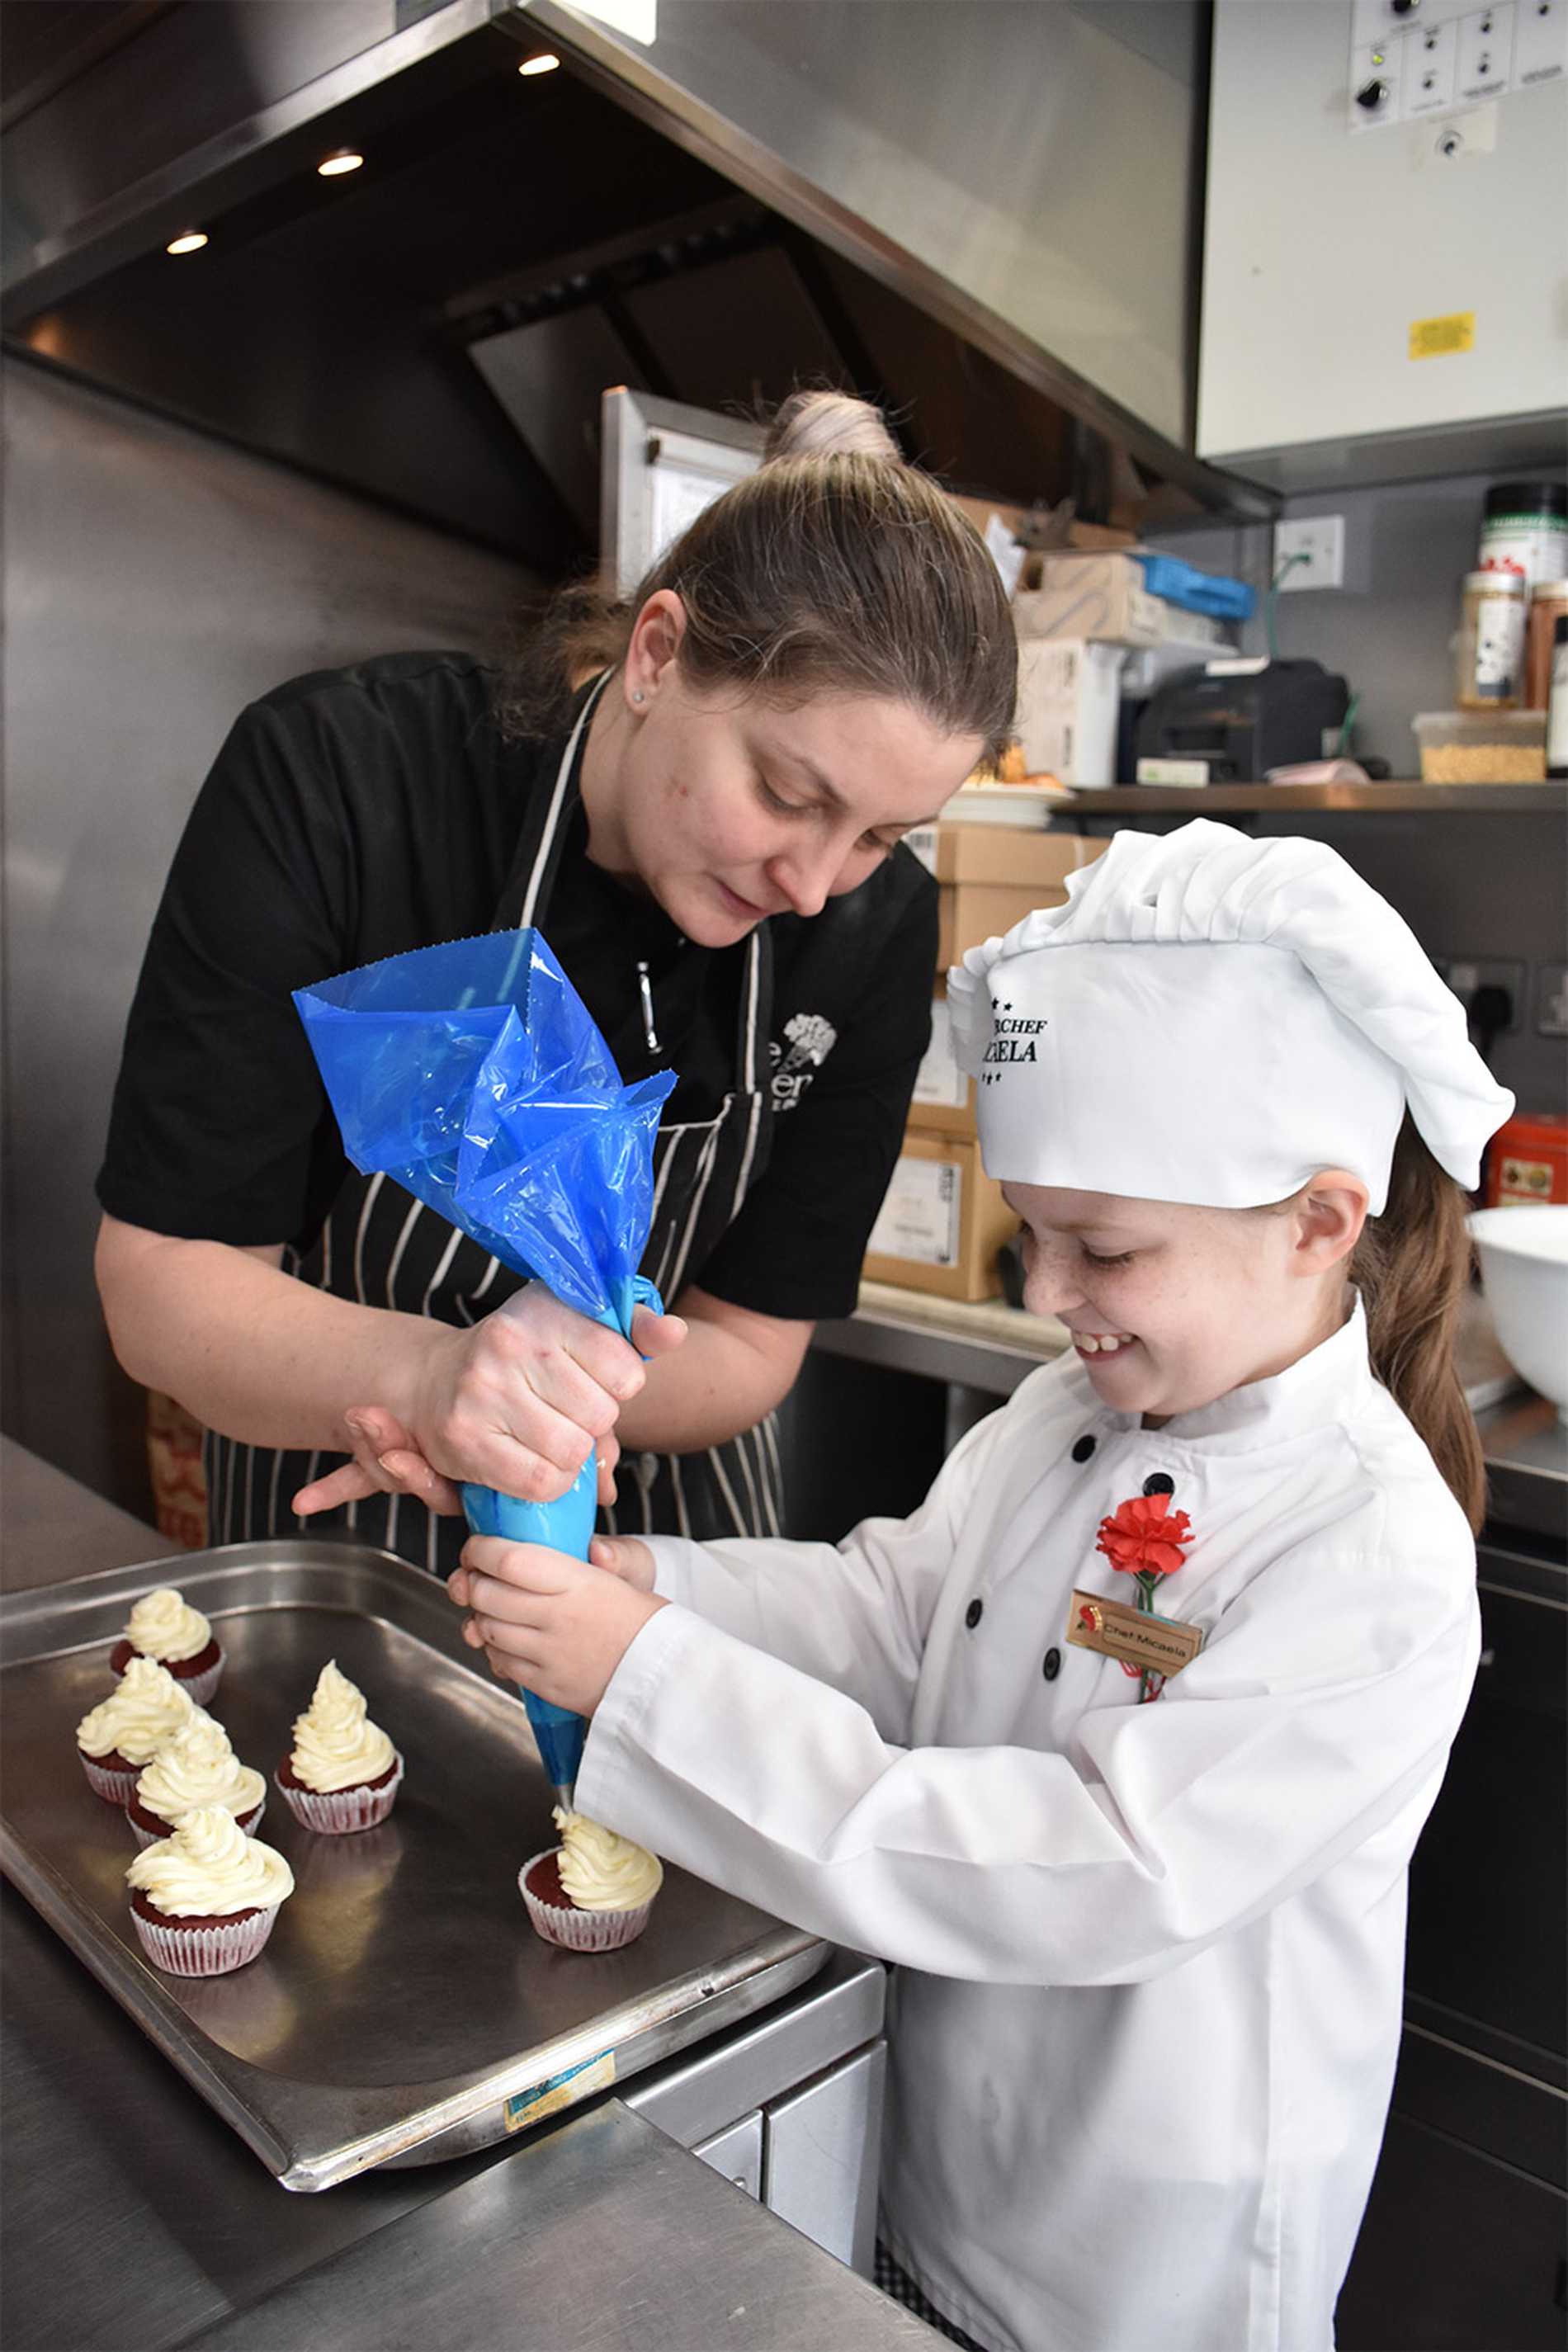 A member of the Reubens Hotel team helping Micaela to ice a tray of cupcakes.